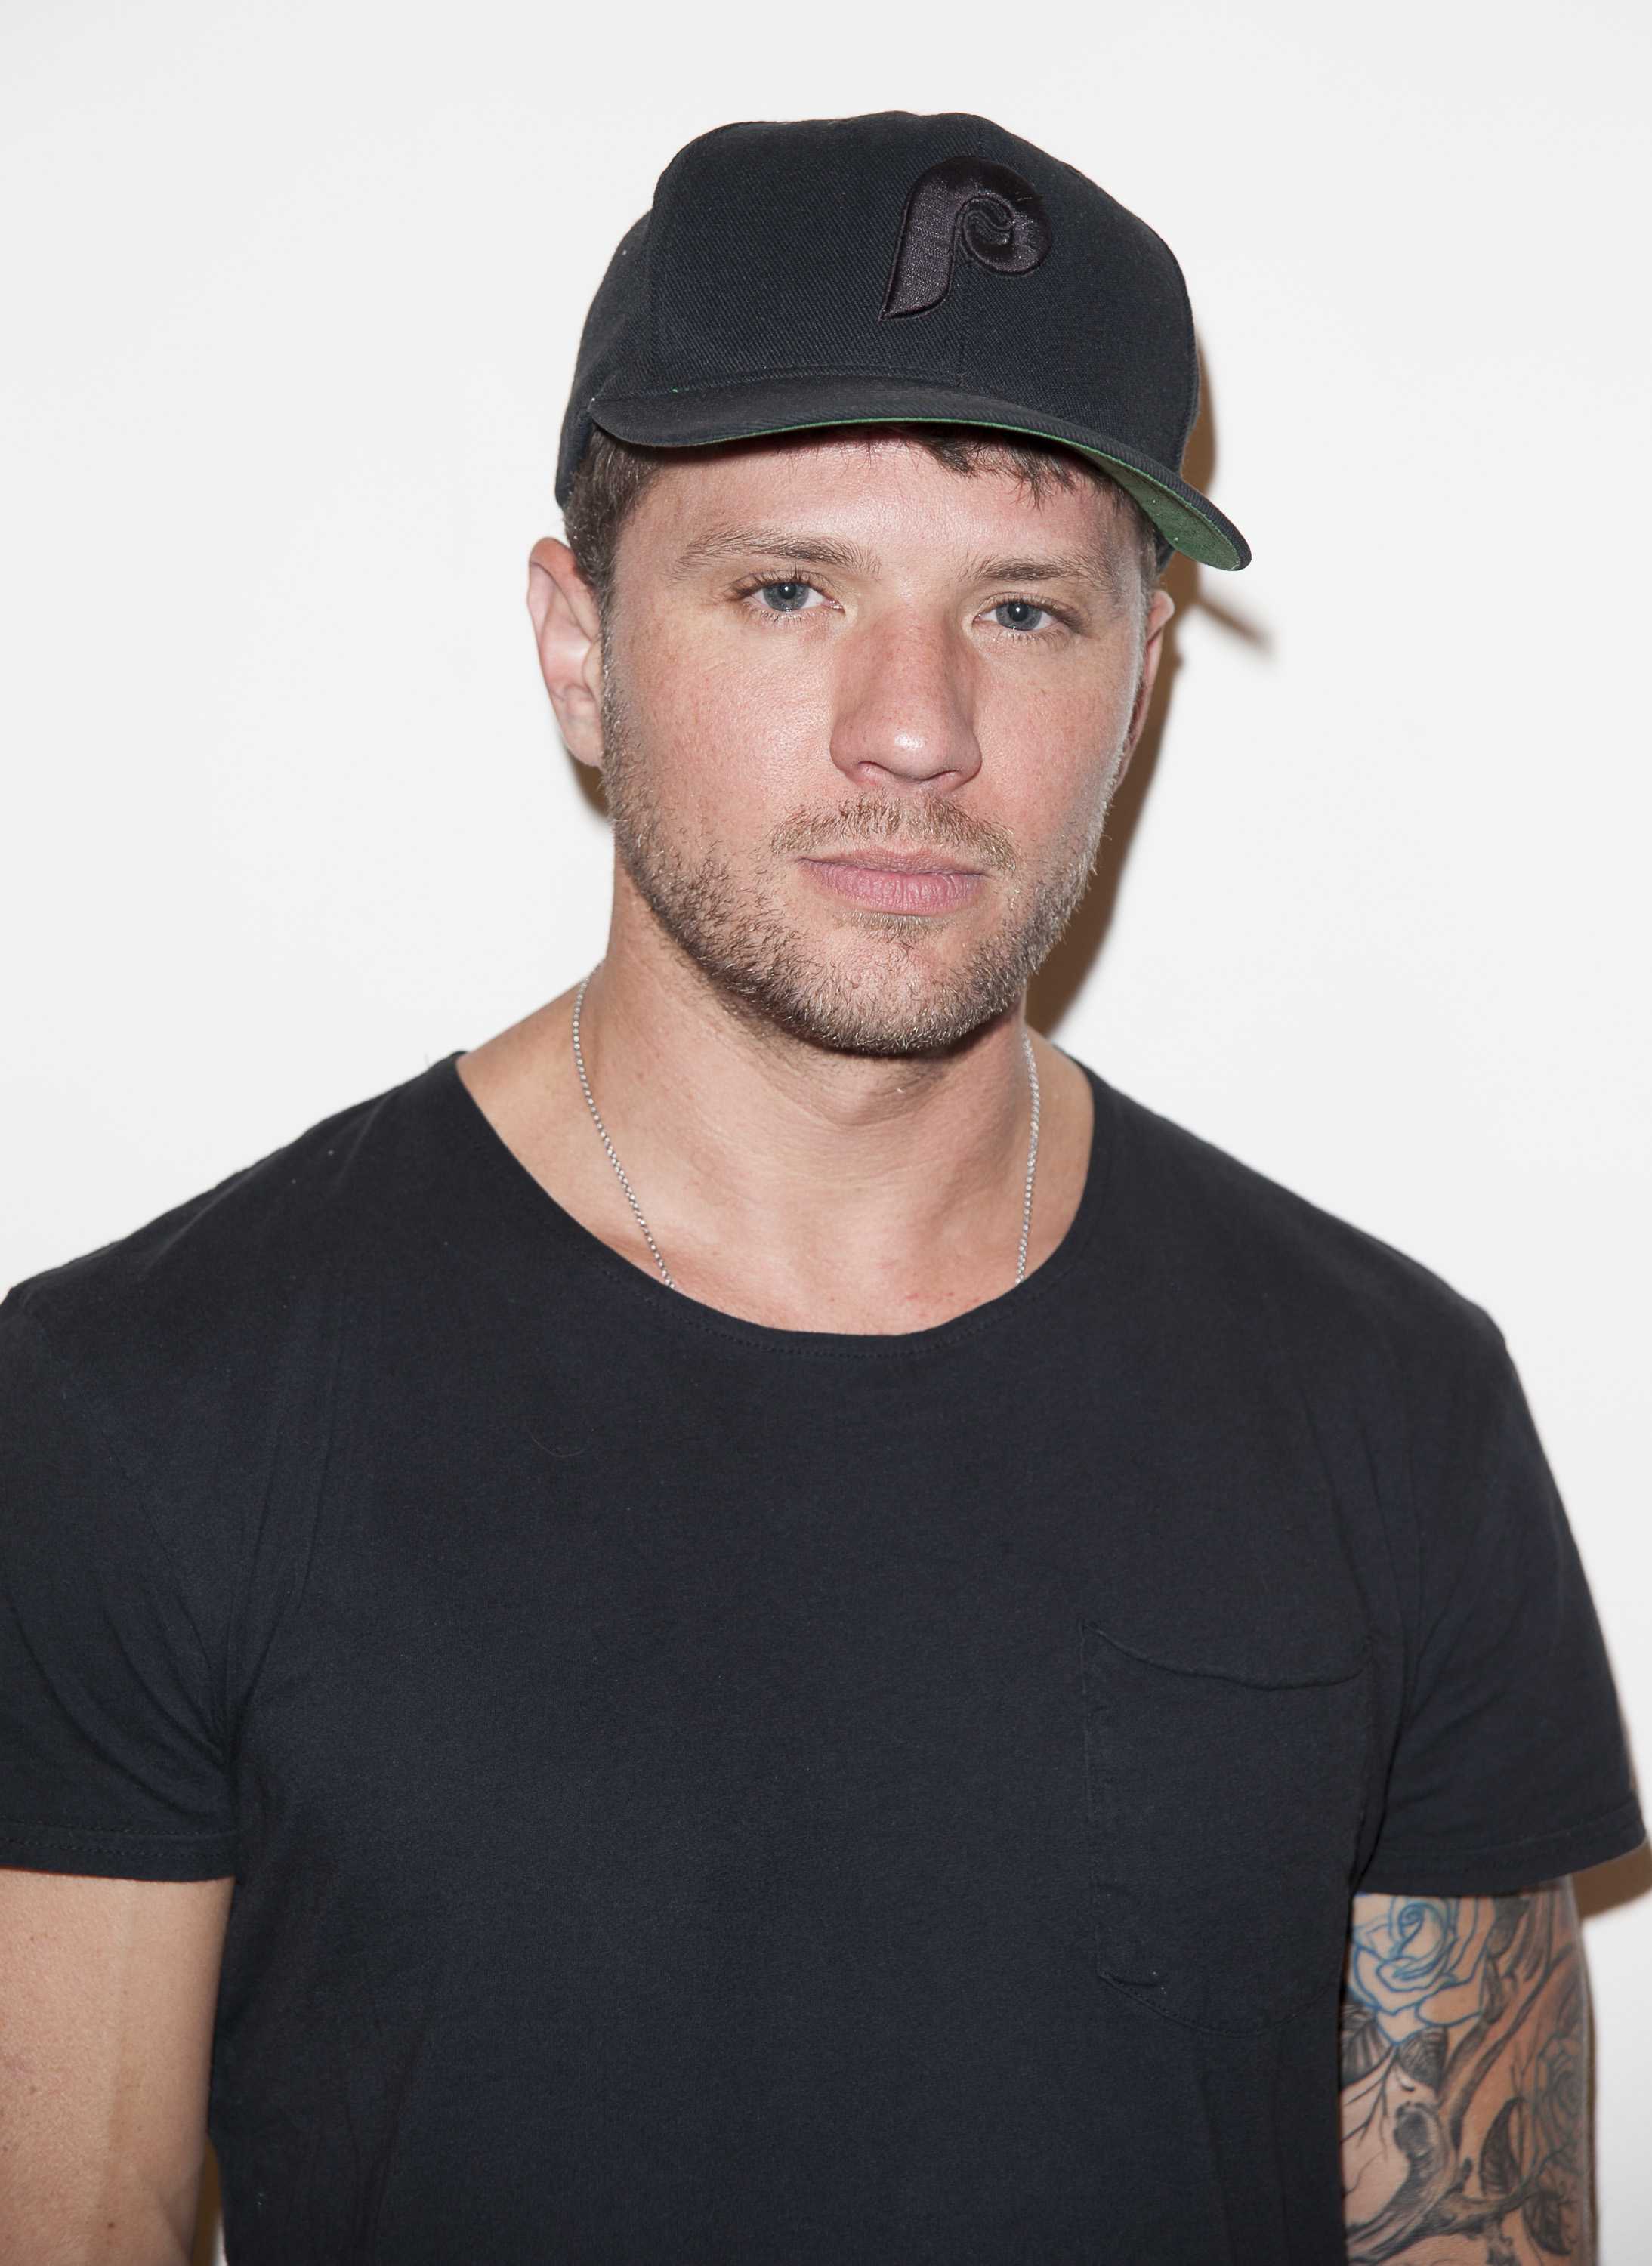 Ryan Phillippe’s ex-girlfriend is suing him for assault